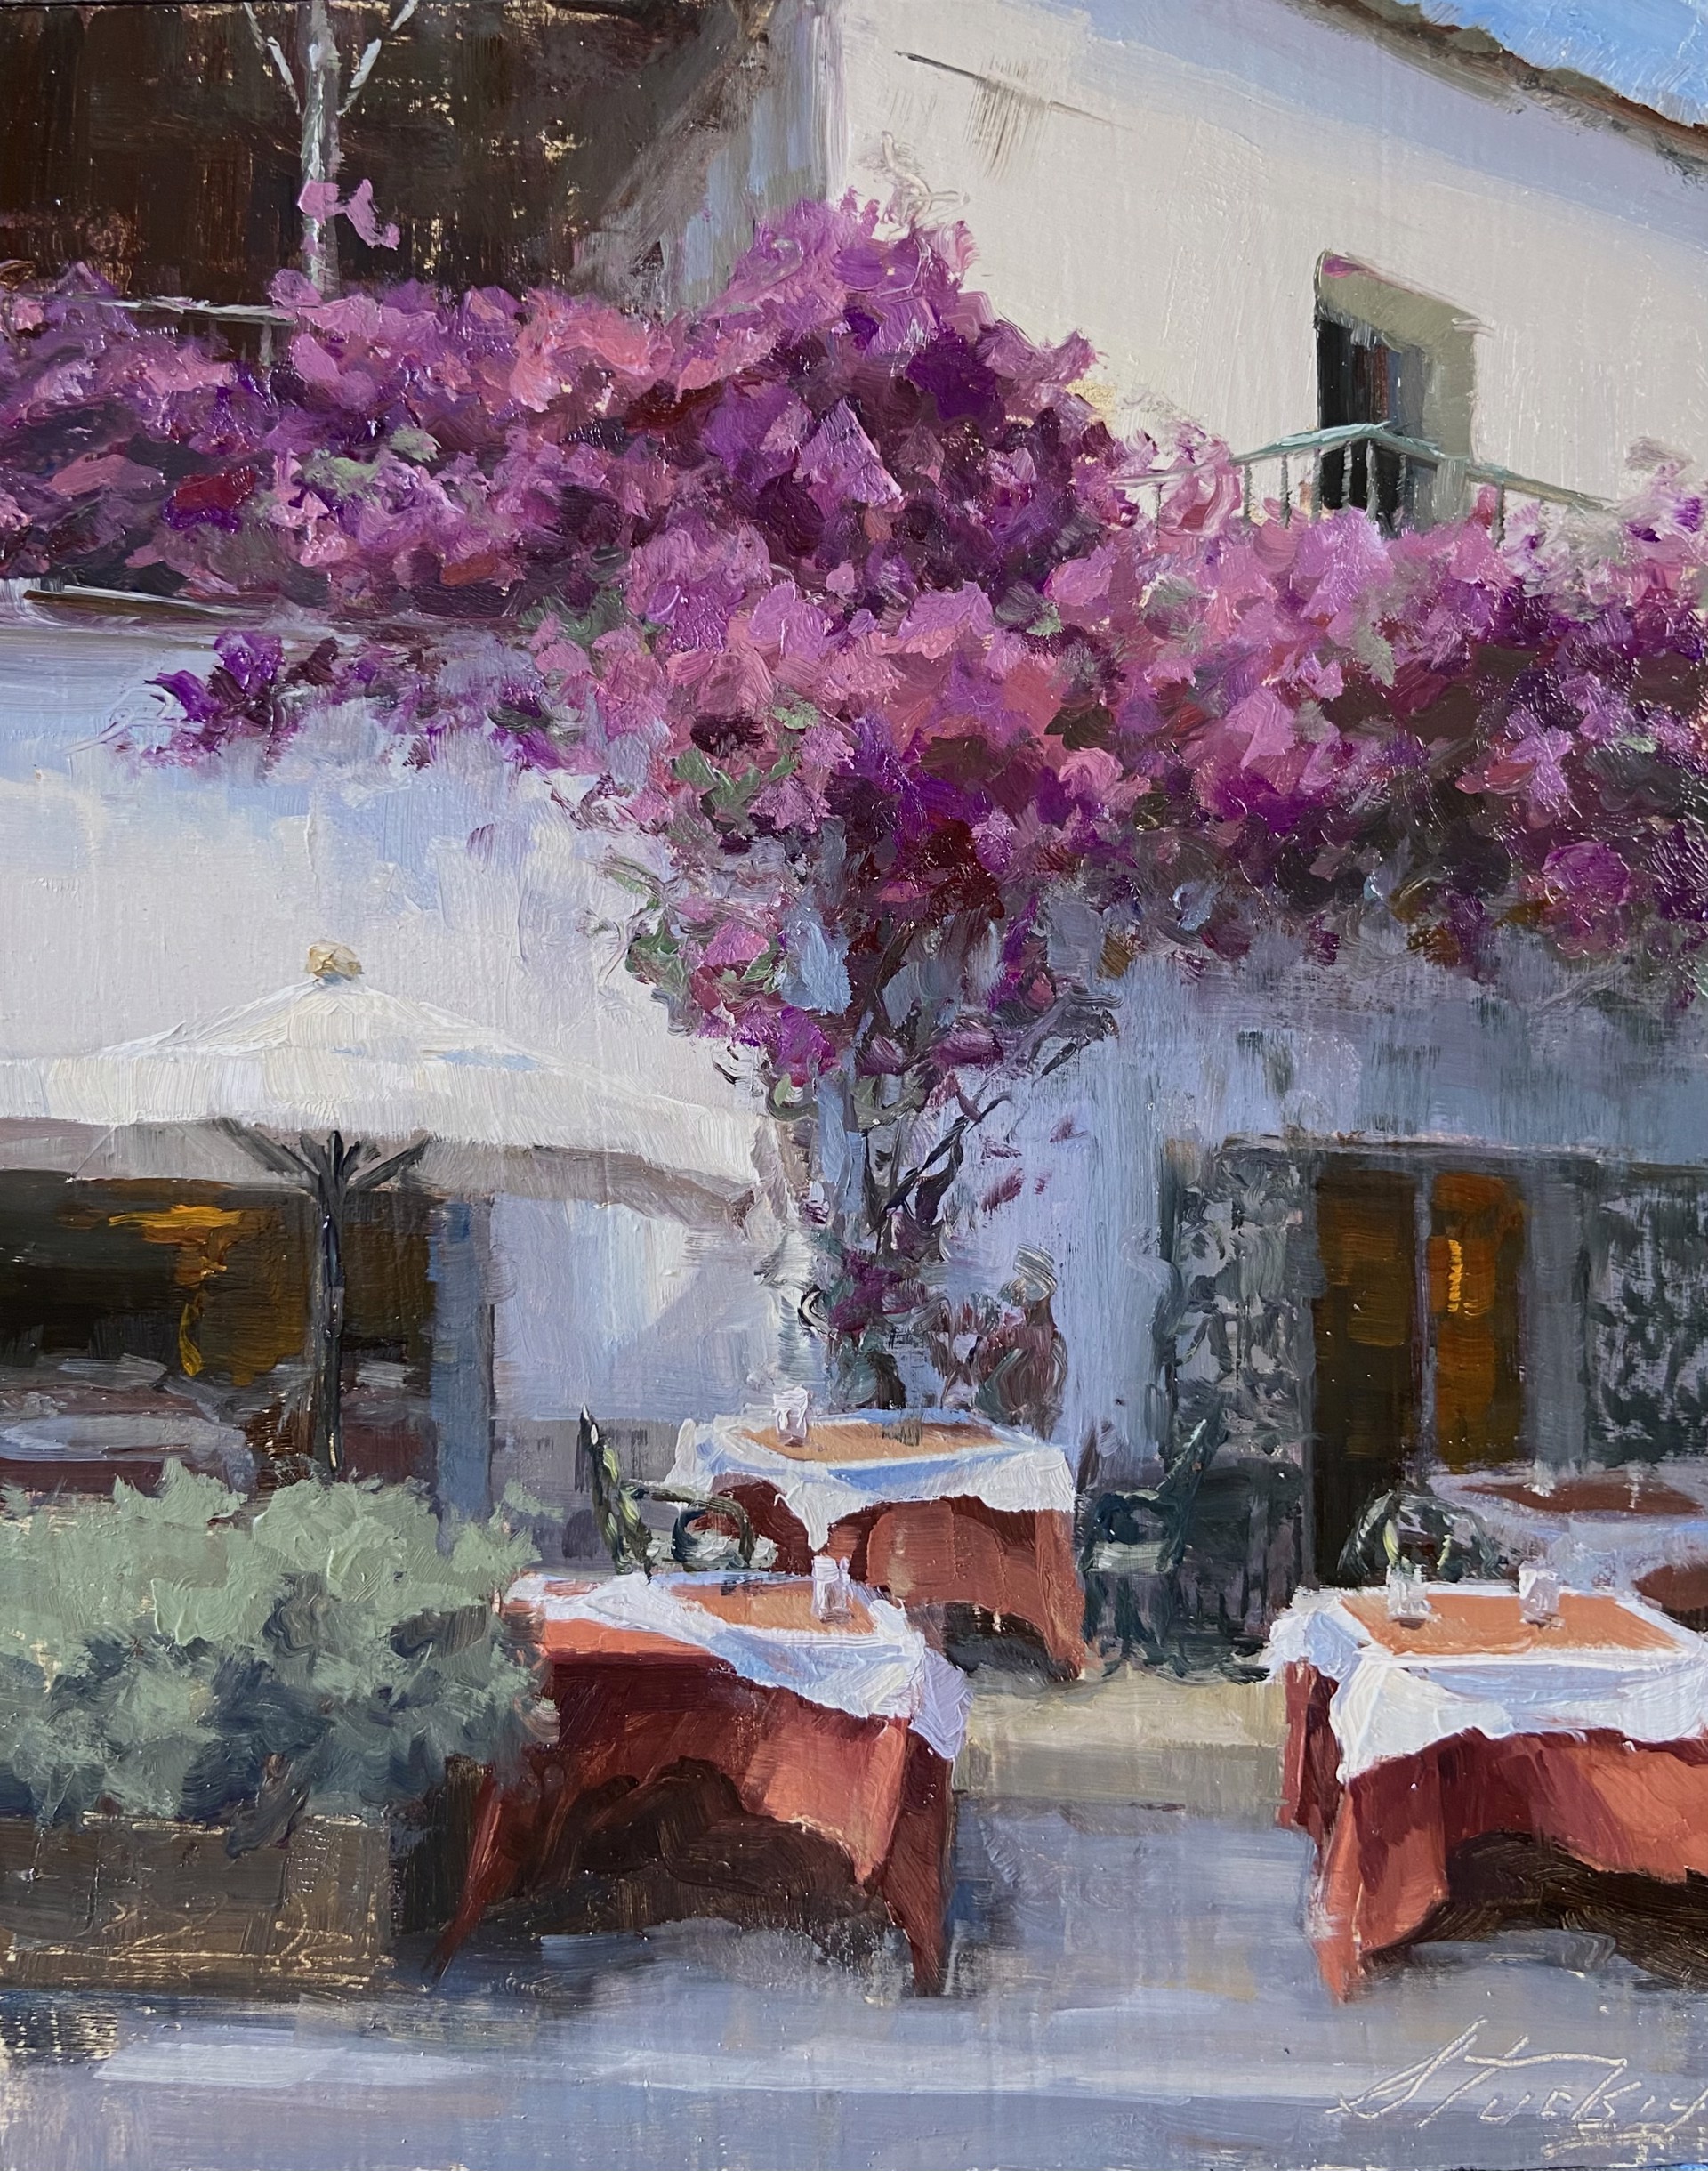 Cafe in Italy by Kyle Stuckey